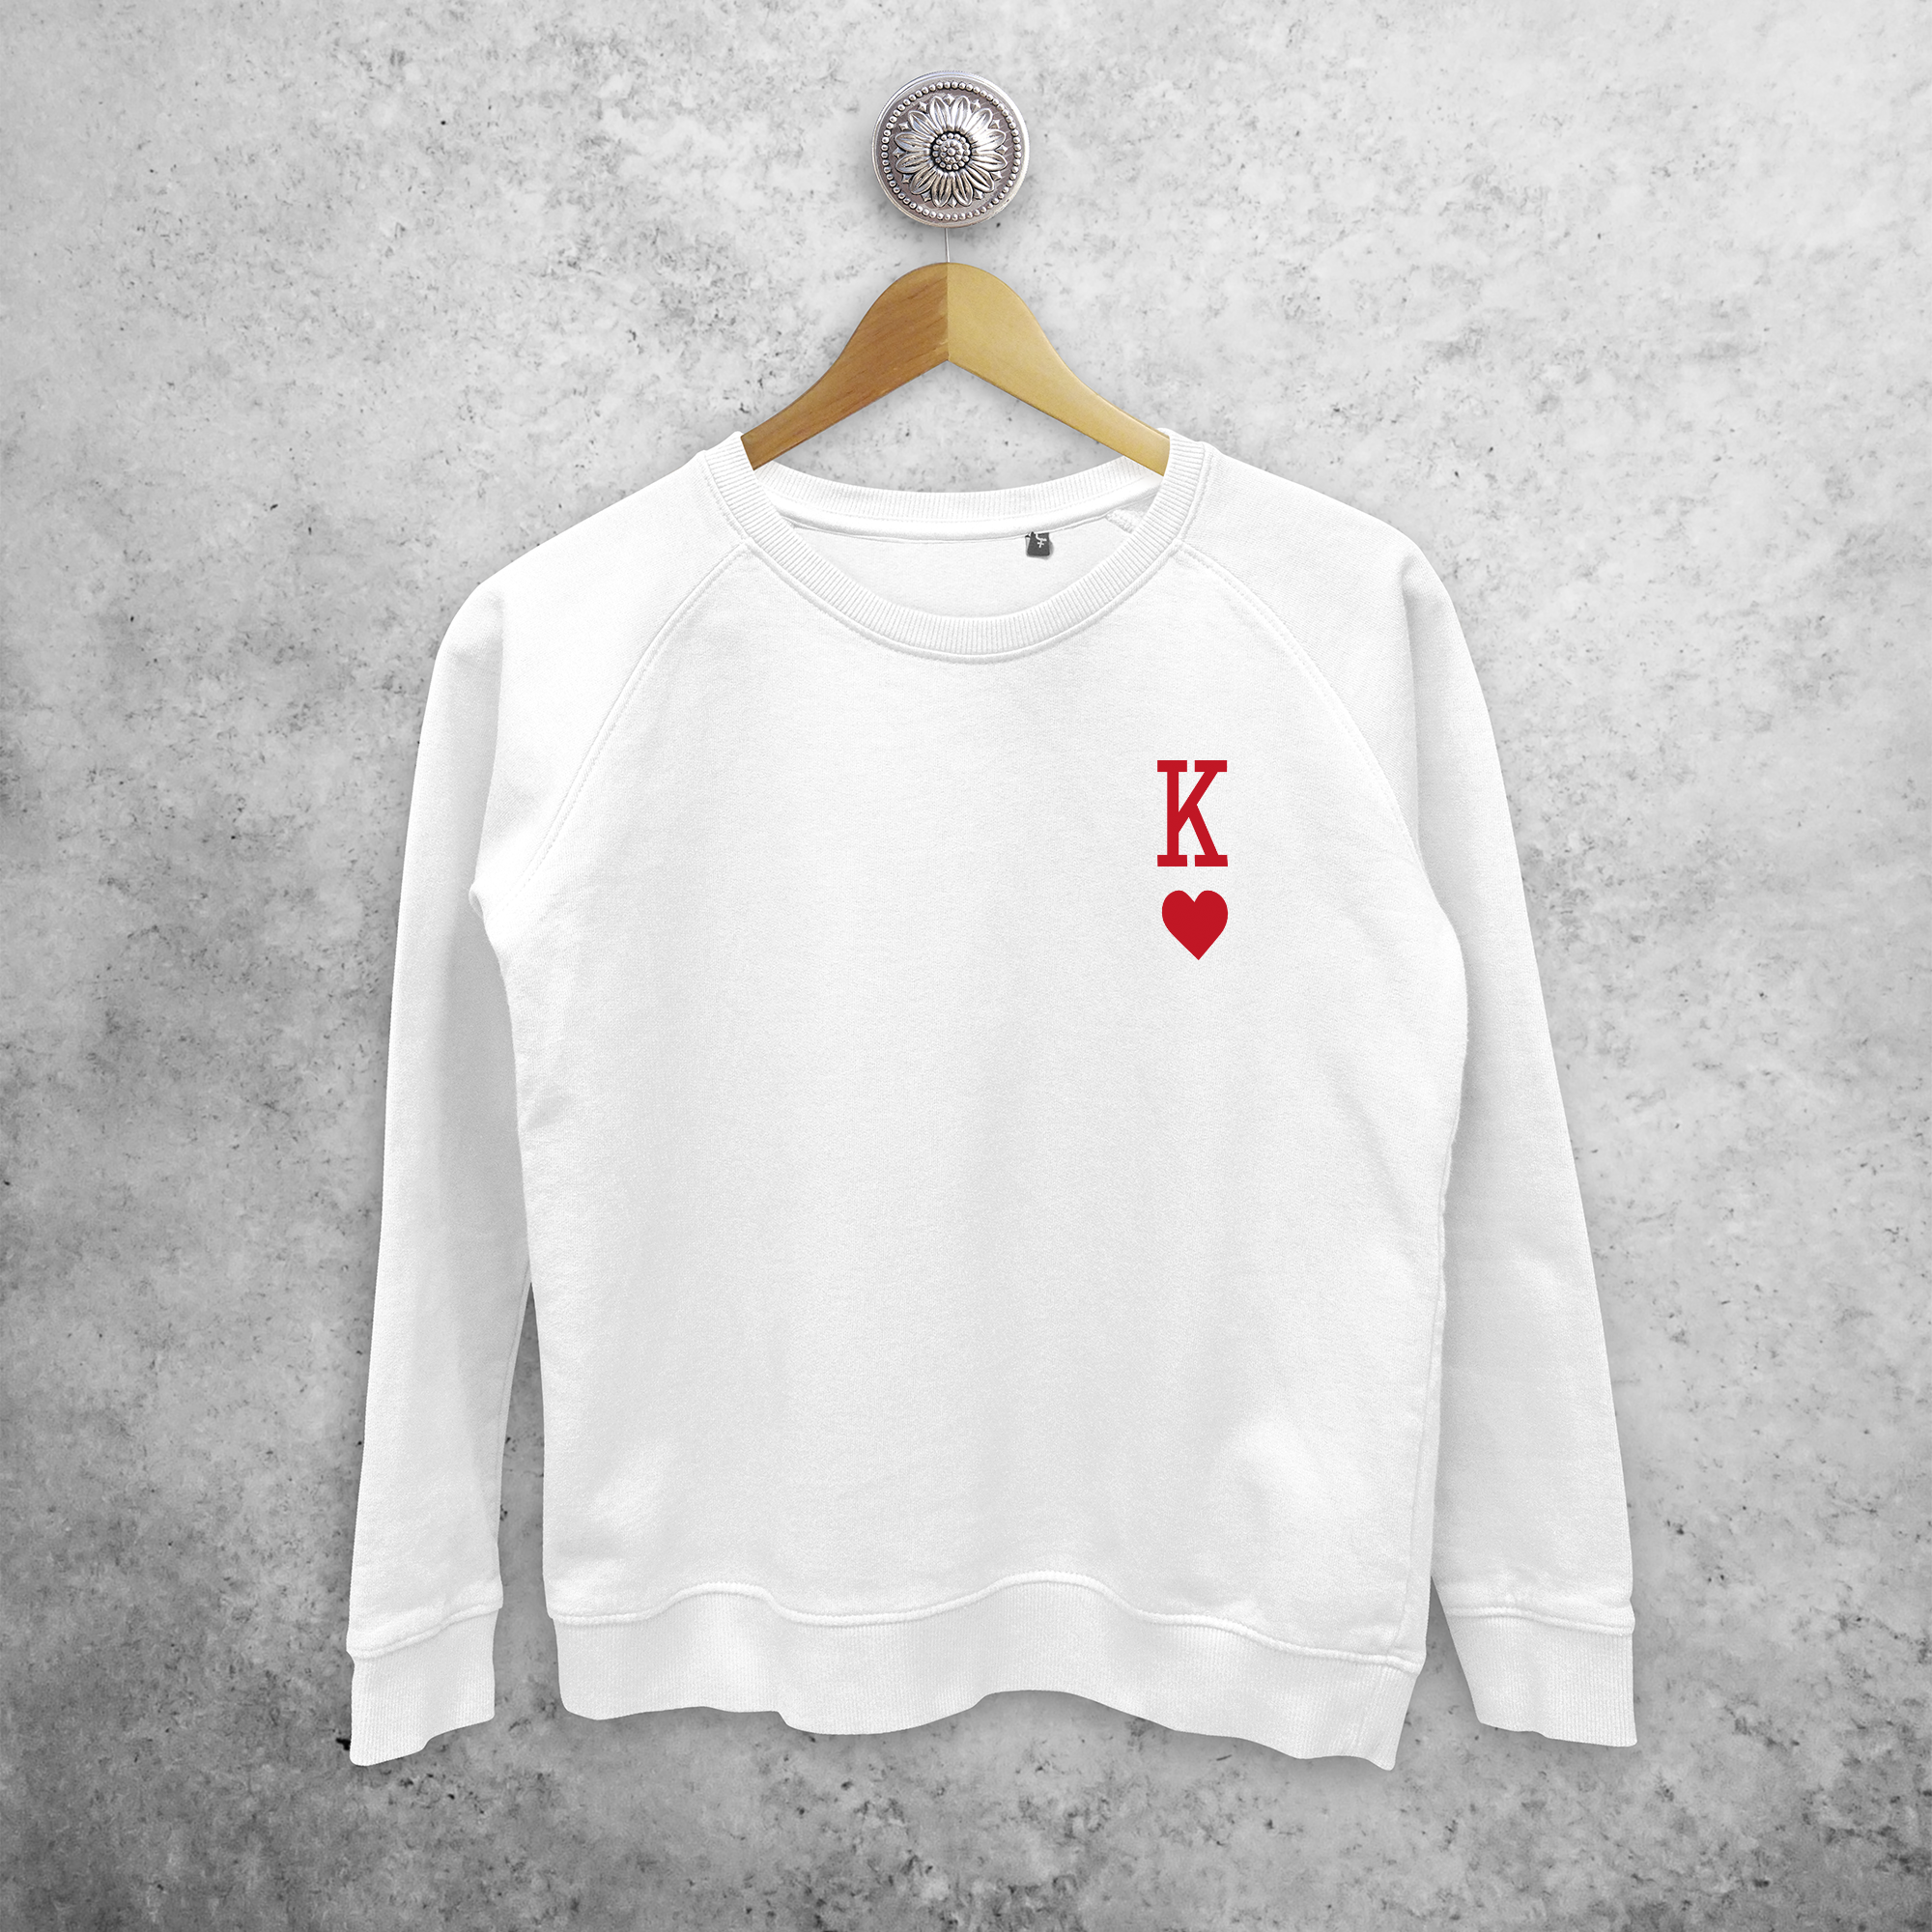 'King of hearts' sweater